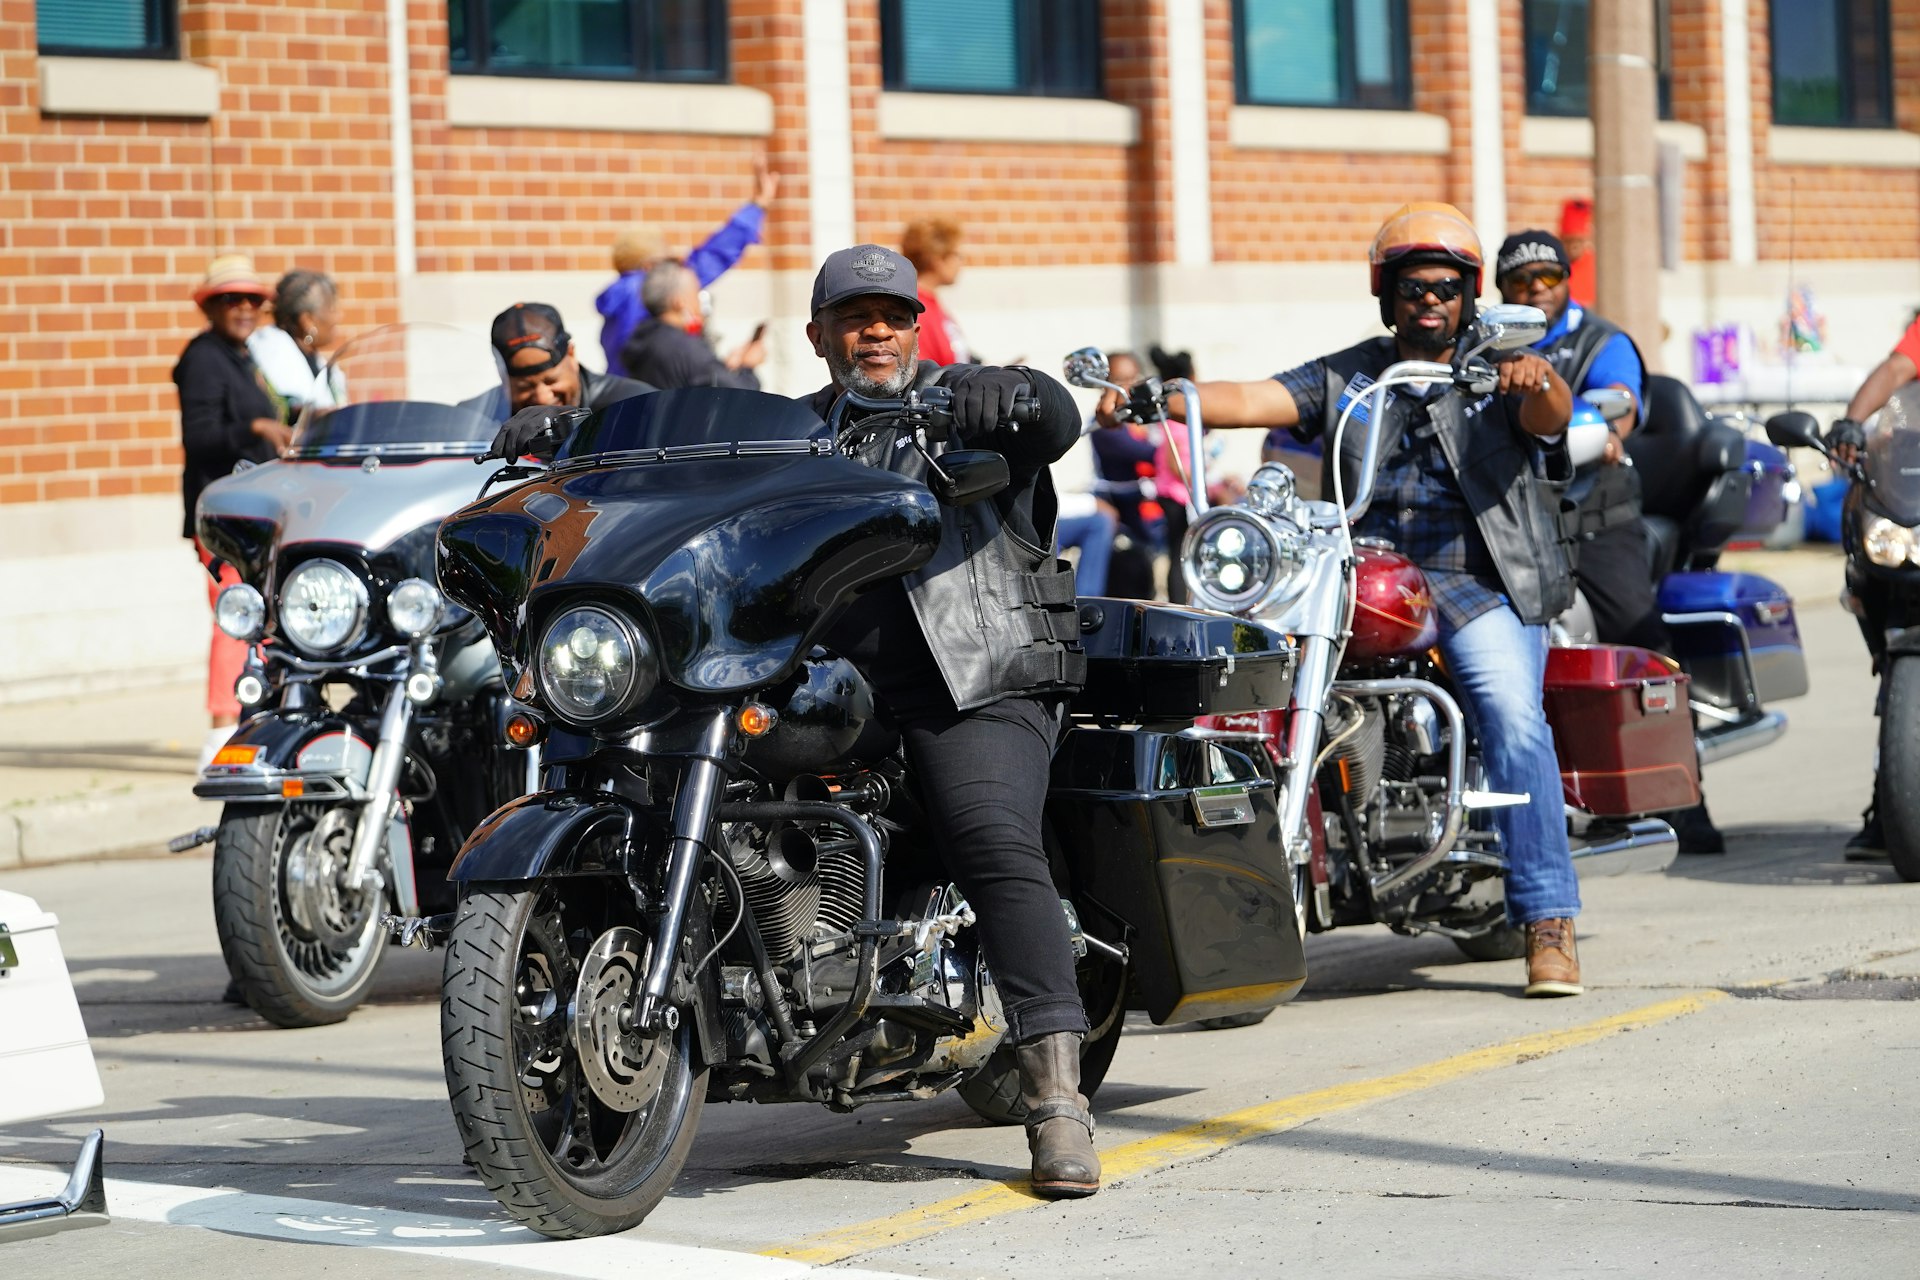 A group of Harley-Davison motorcycle riders in Milwaukee, Wisconsin, on a sunny day